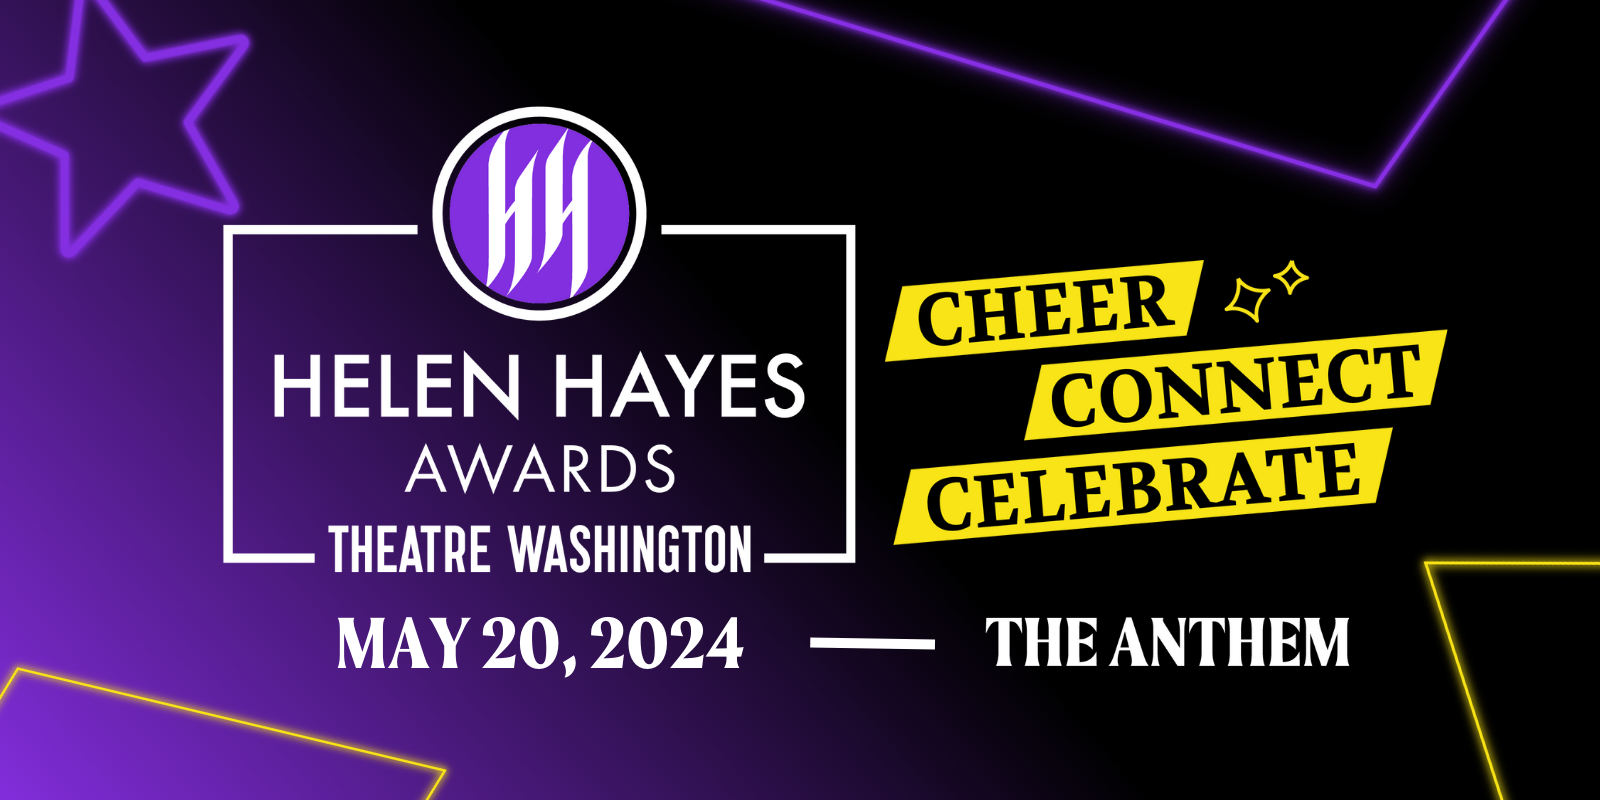 Helen Hayes Awards May 20, 2024 Cheer Celebrate Connect The Anthem